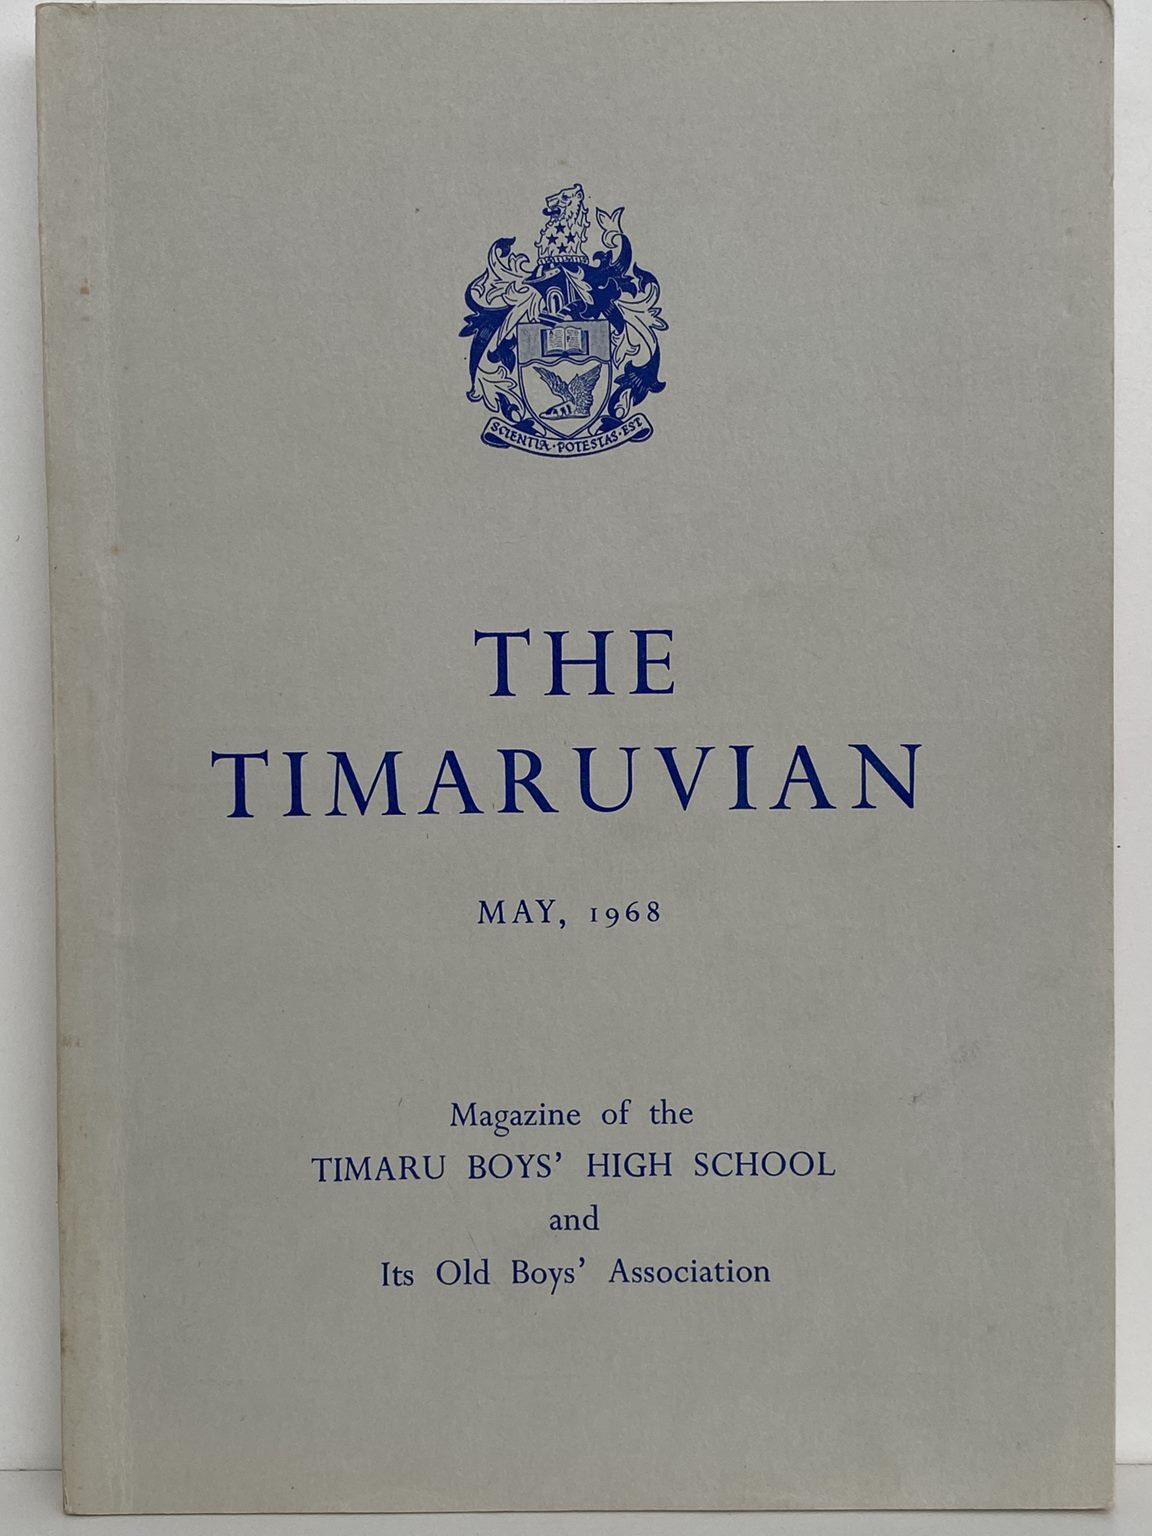 THE TIMARUVIAN: Magazine of the Timaru Boys' High School and its Old Boys' Association 1968